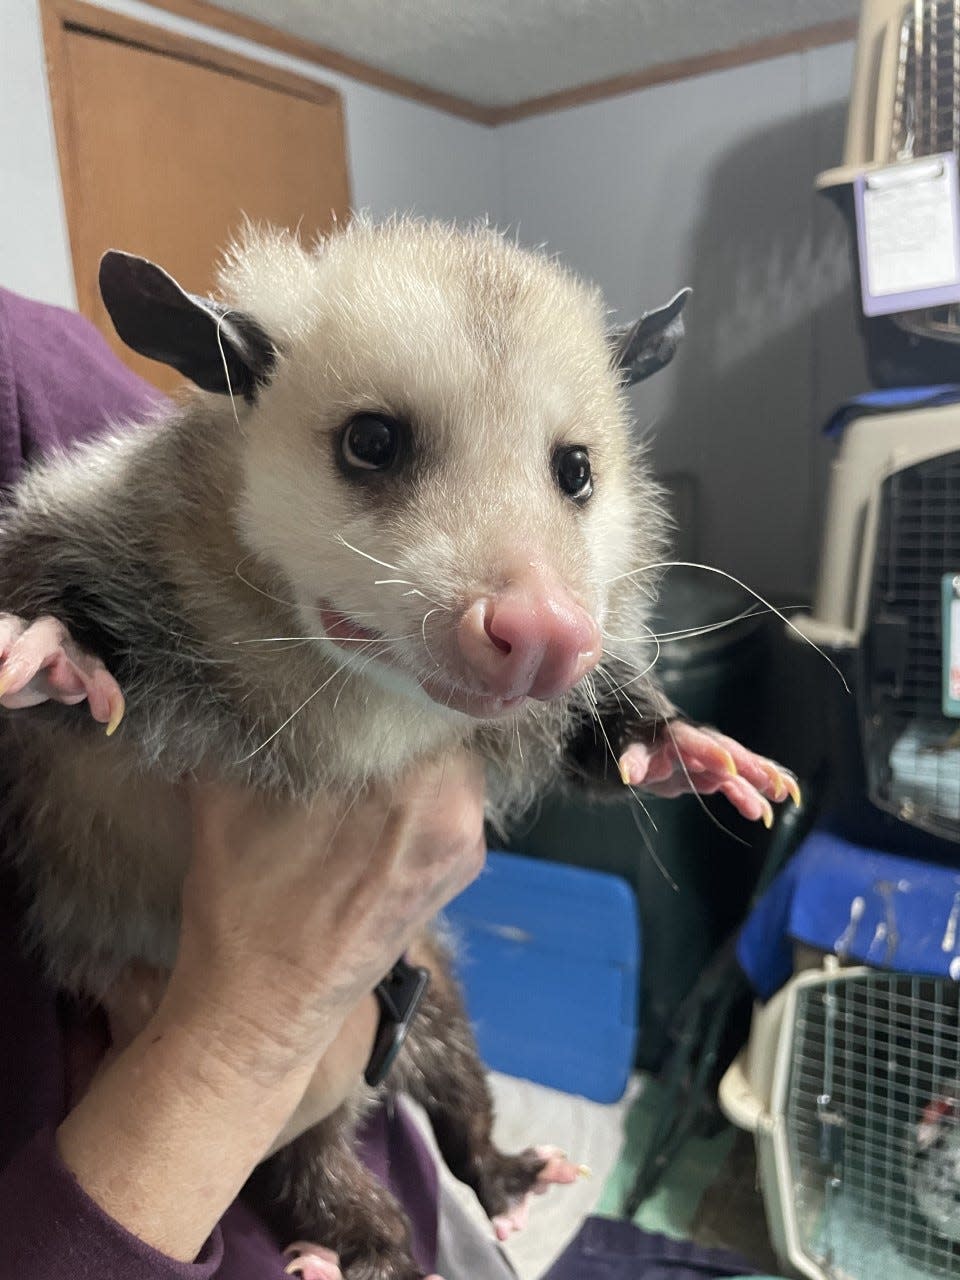 Possums have semi-prehensile tails that they use to gather materials to make their nests. This possum is missing a tail, making it non-releasable, and will be going to a home to be someone's pet.